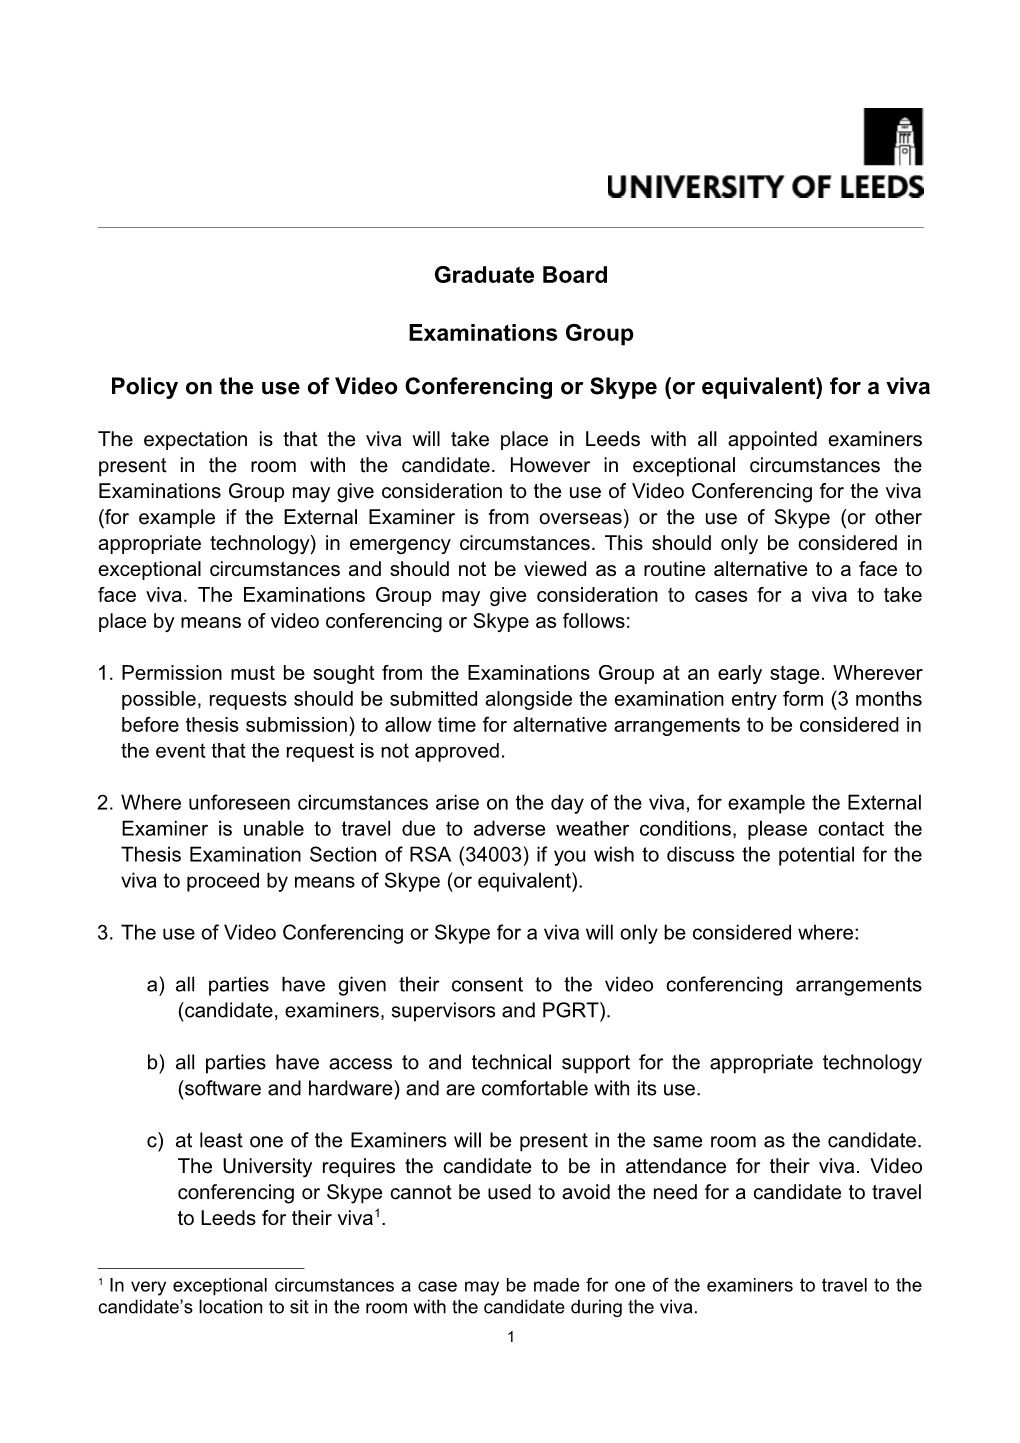 Policy on the Use of Video Conferencing Or Skype (Or Equivalent) for a Viva